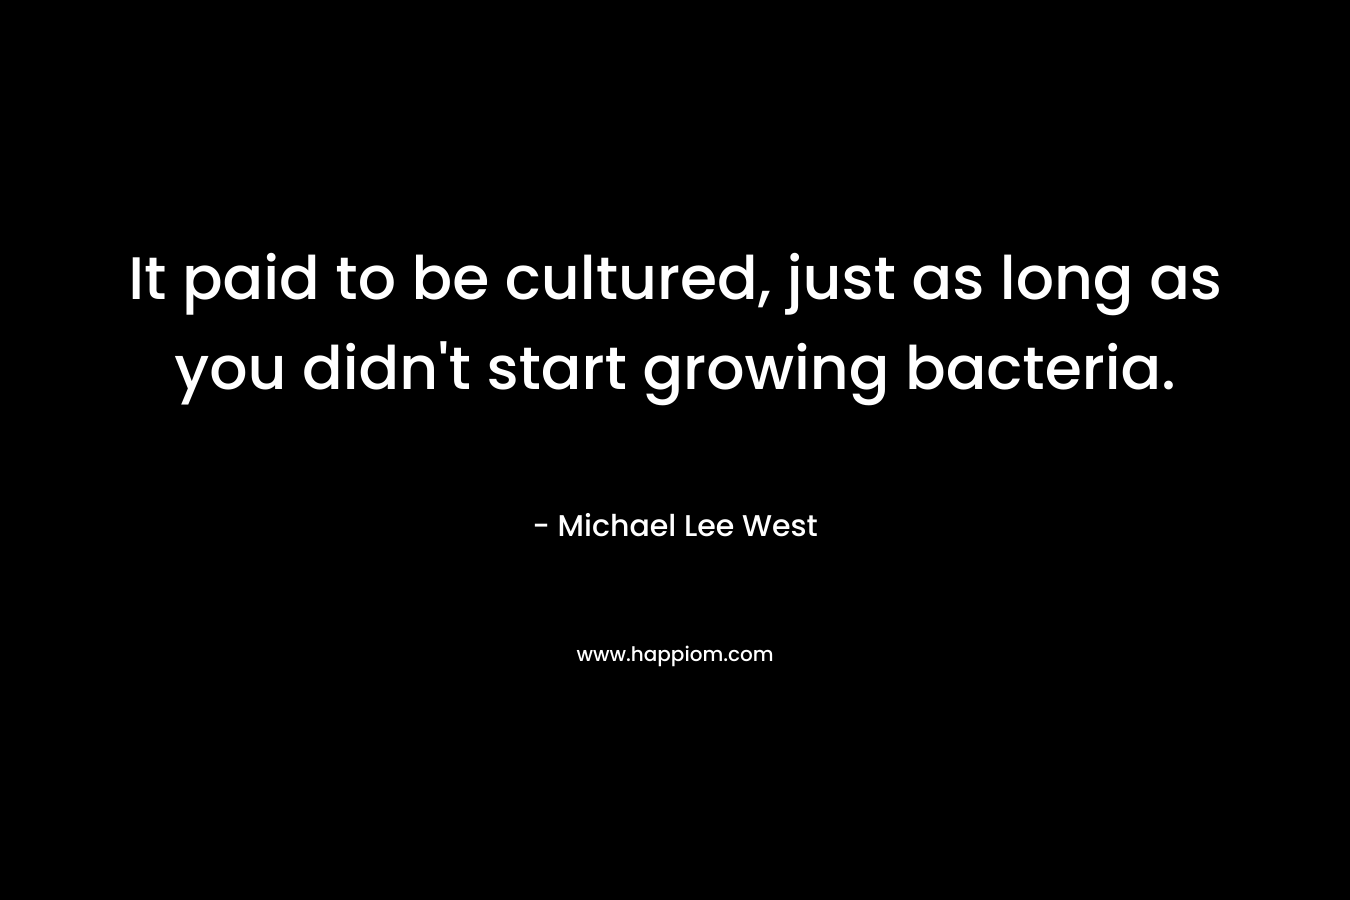 It paid to be cultured, just as long as you didn't start growing bacteria.